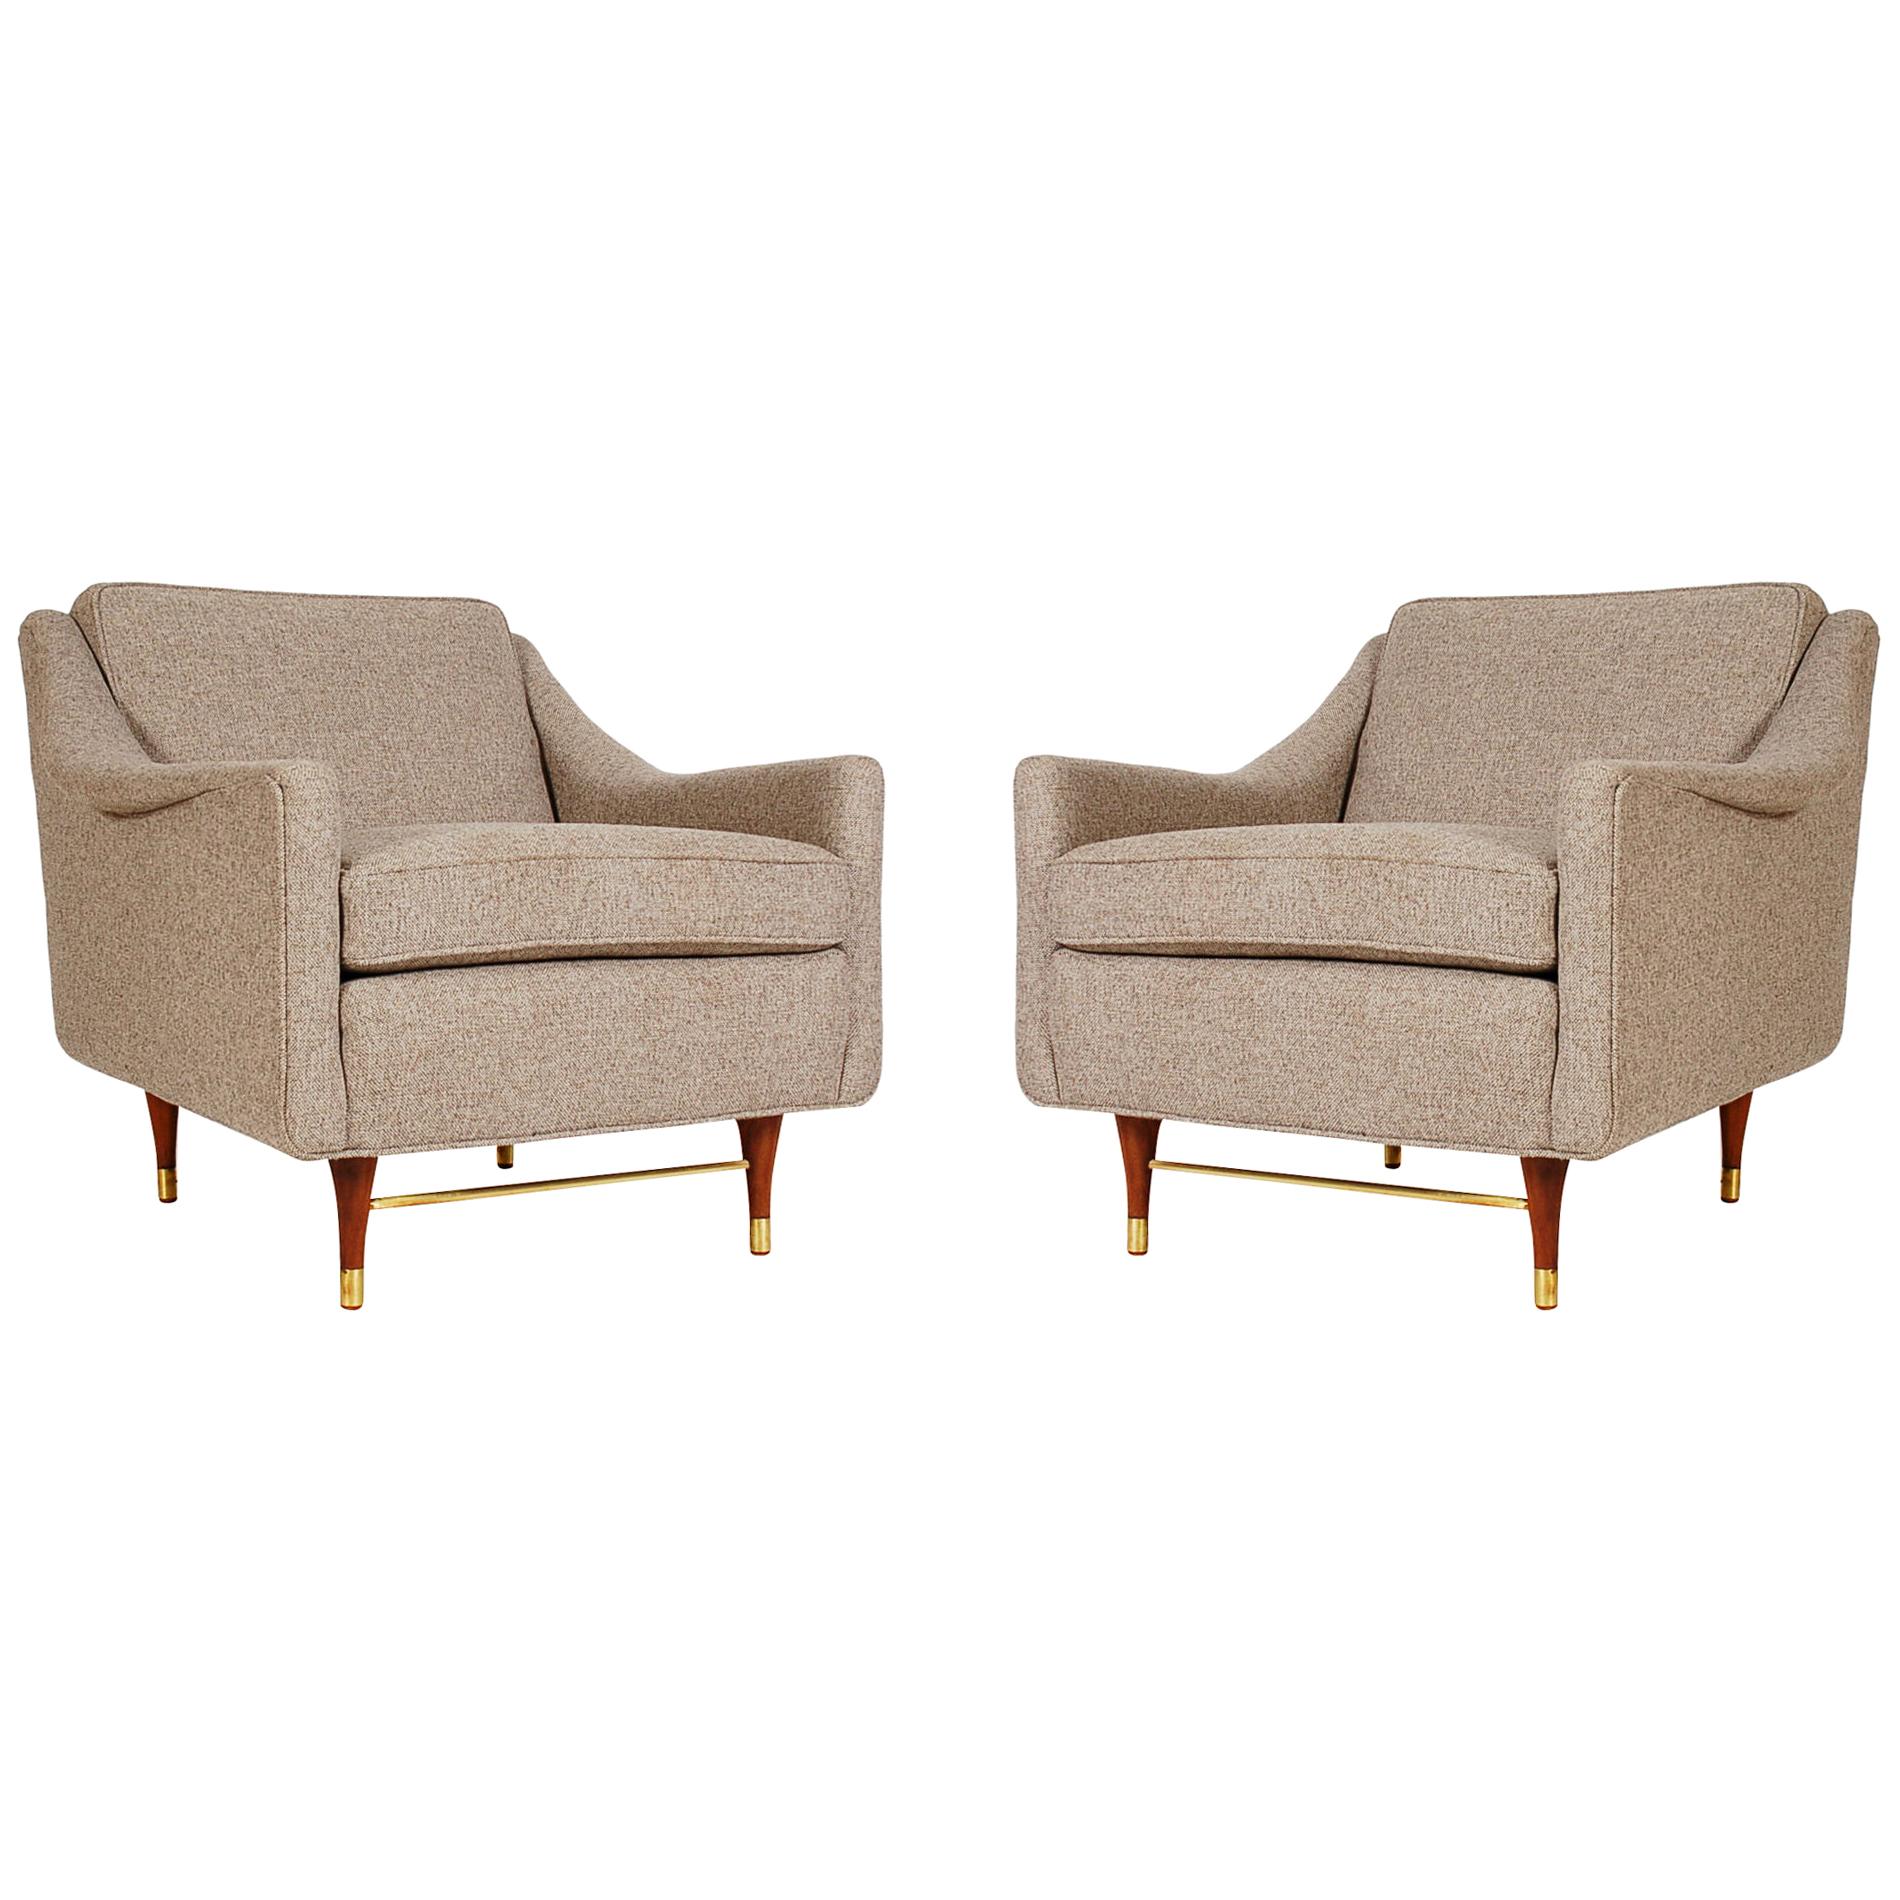 Mid-Century Modern Lounge or Club Chairs After Edward Wormley for Dunbar